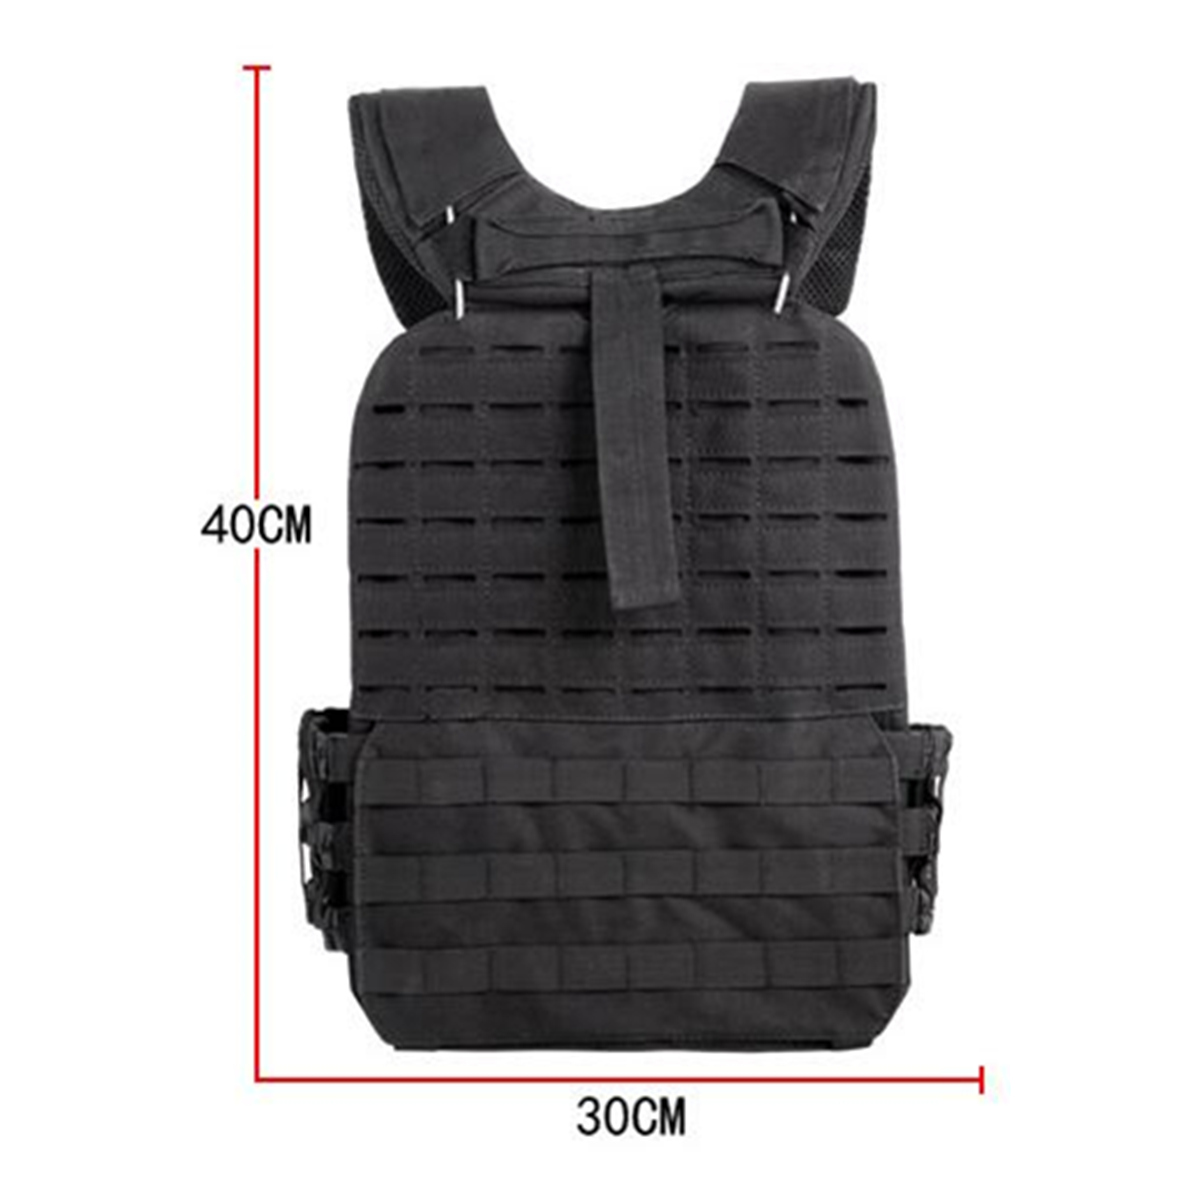 Outdoor-Adult-Tactical-TMC-Molle-Vest--Physical-Training-Sports-Fitness-Oxford-Weight-Waistcoat-1471093-9